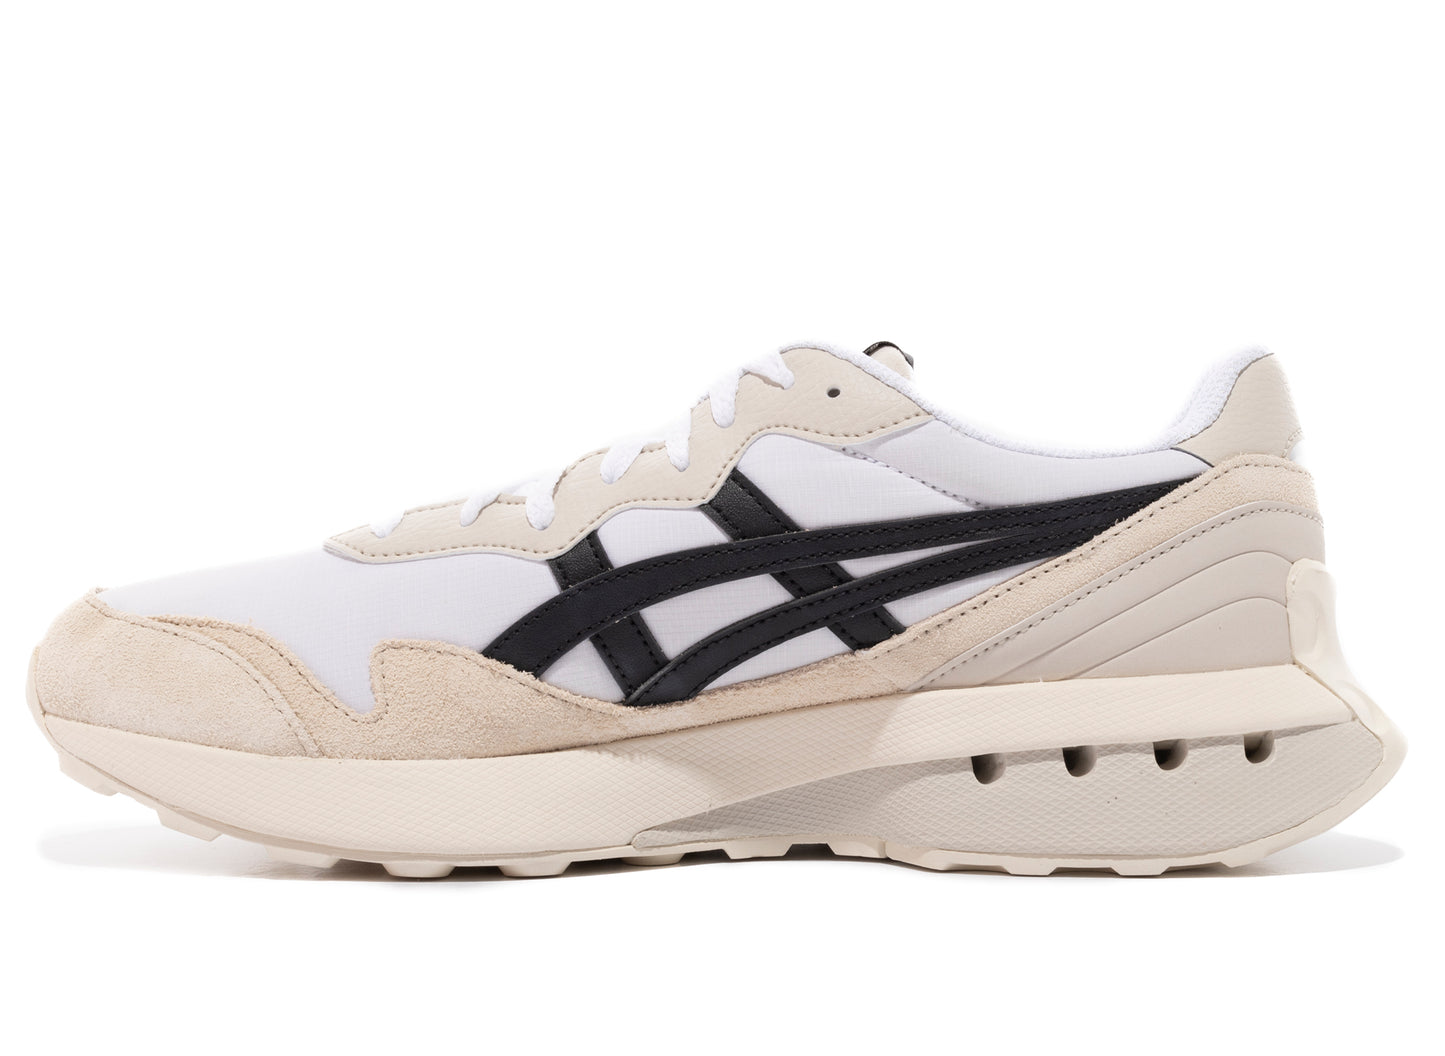 Asics Jogger X81 in White and Smoke Grey